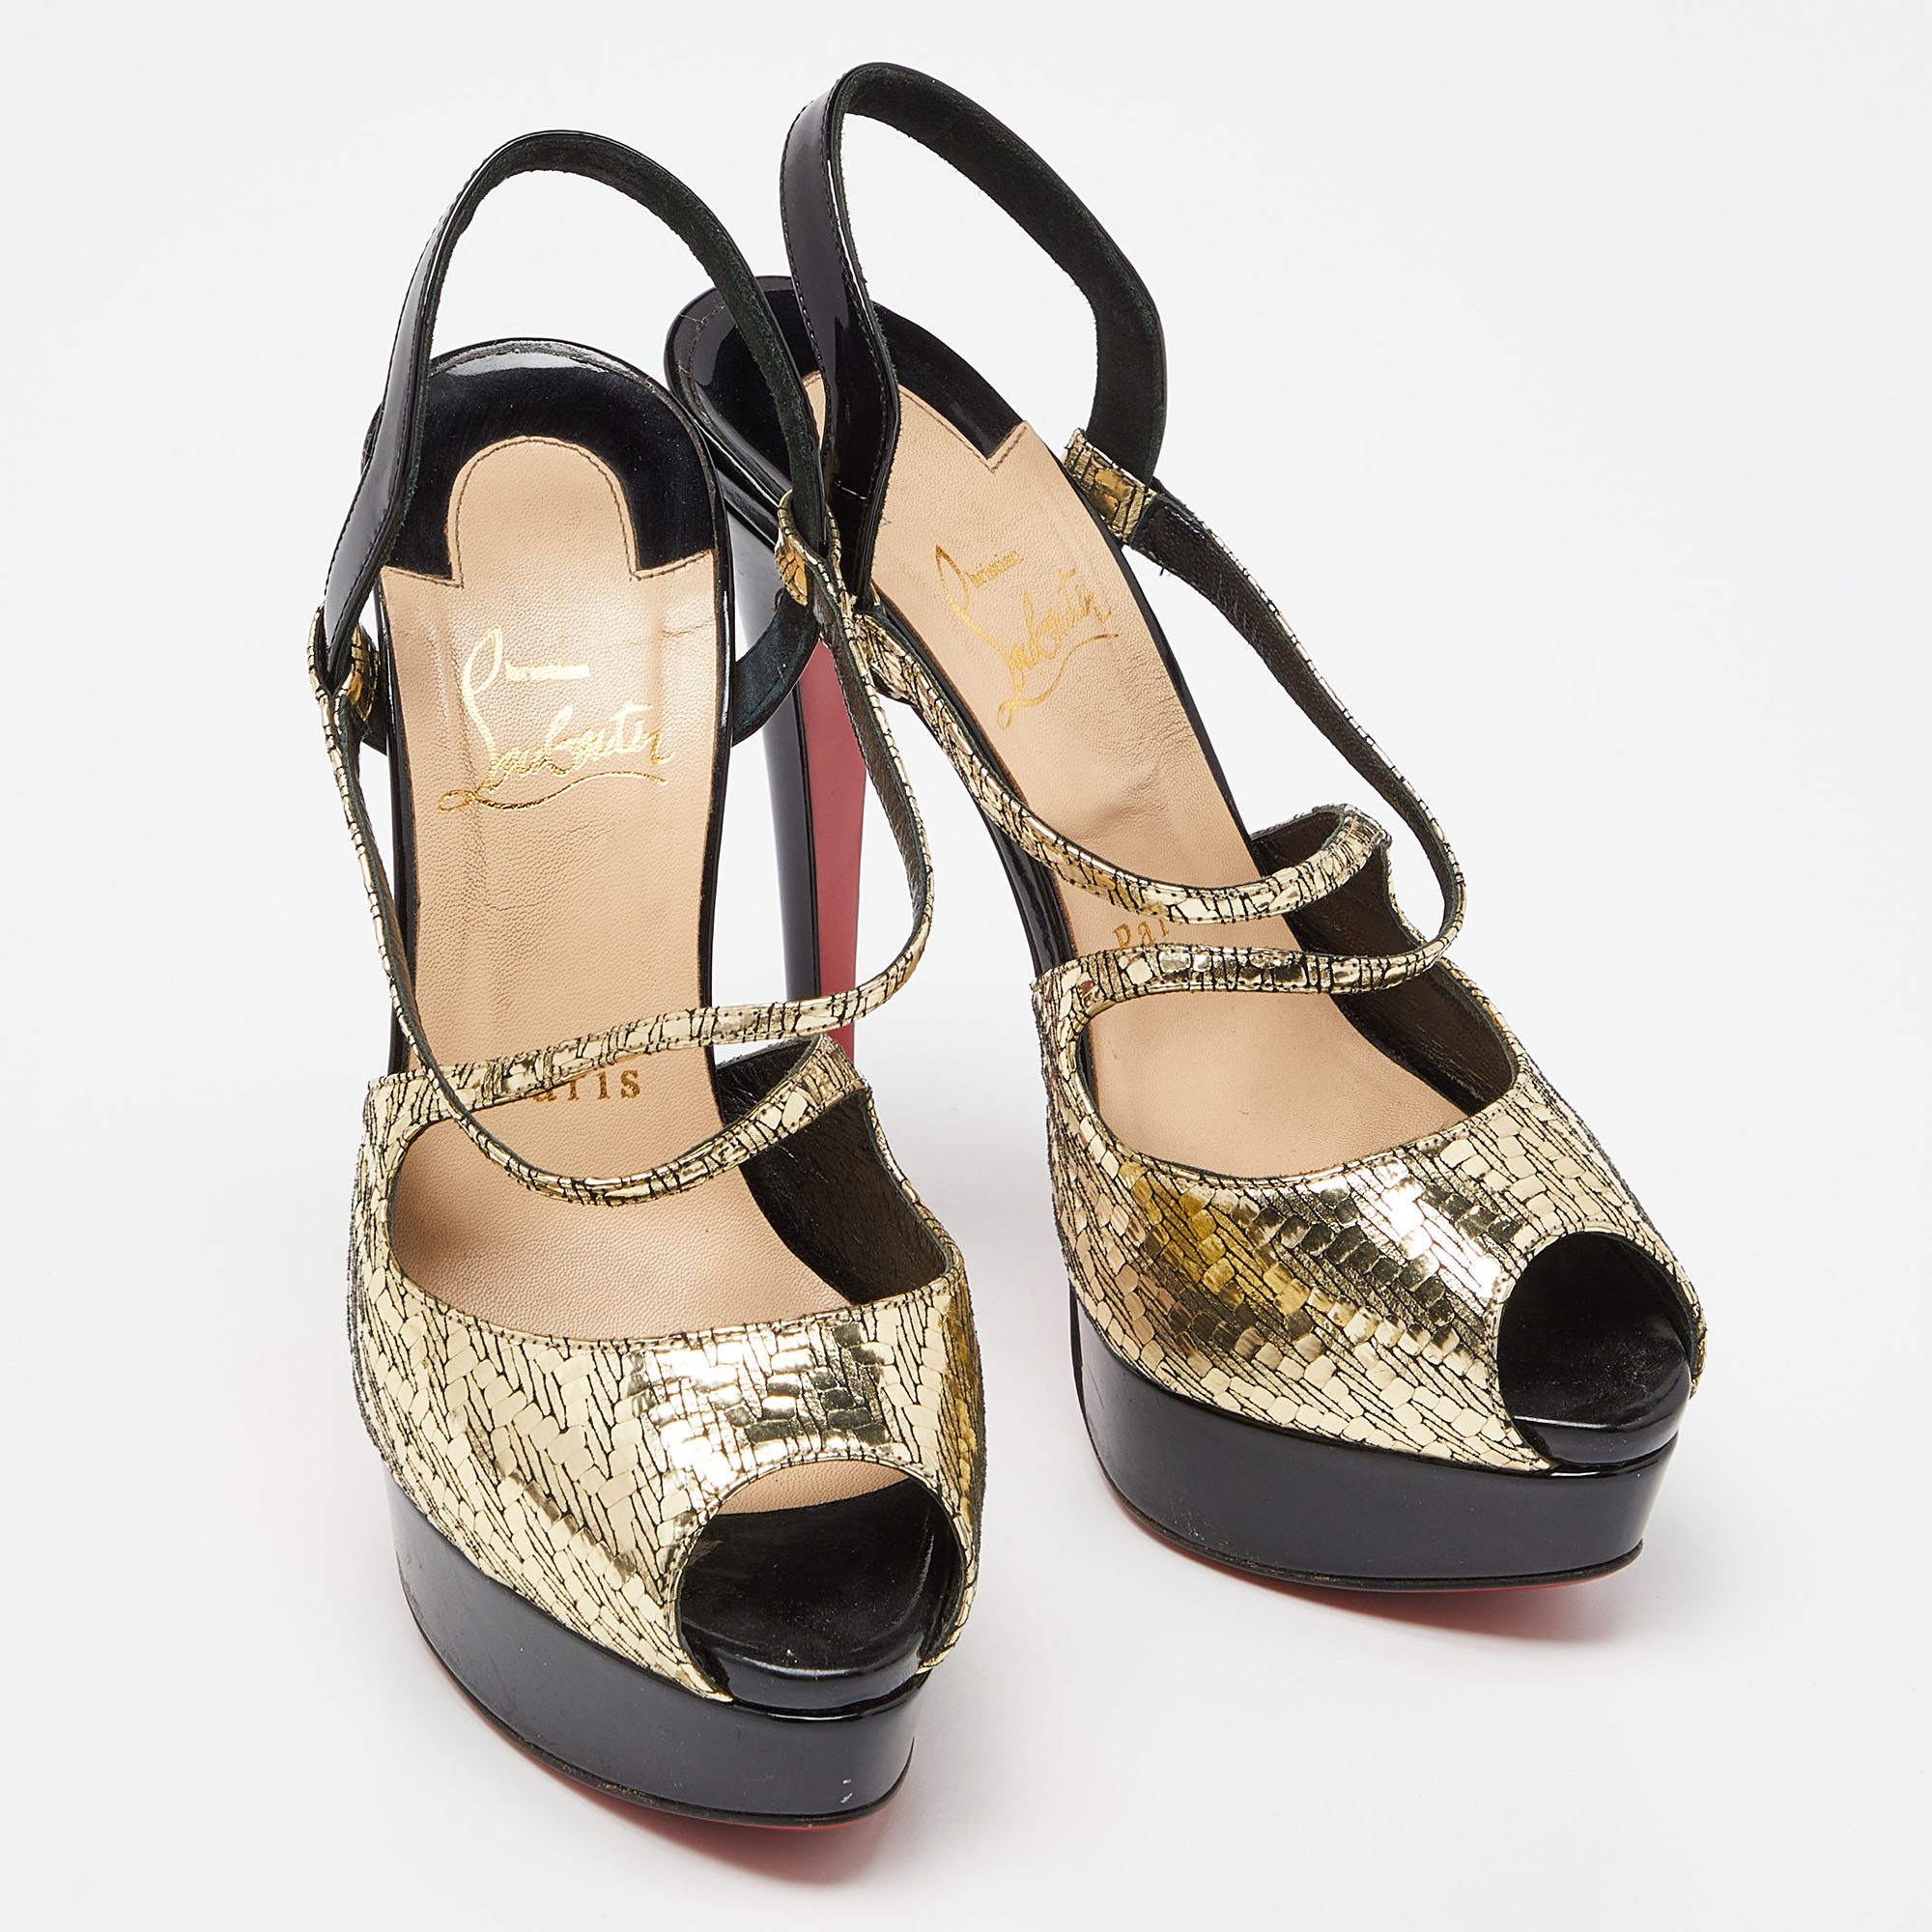 Christian Louboutin Black/Gold Patent Leather Cross Street Strappy Sandals Size 36